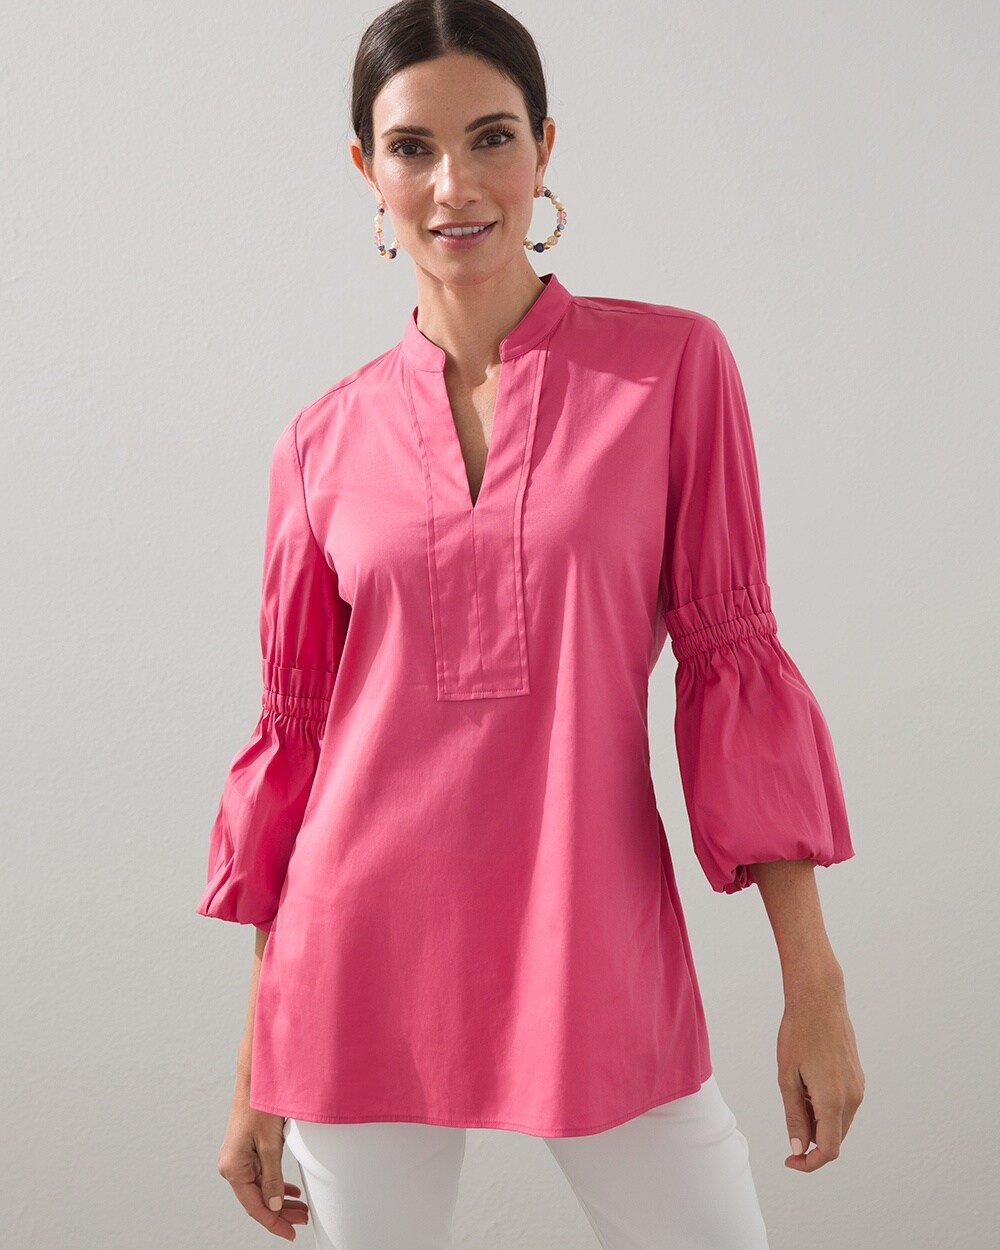 Poplin Ruffle Sleeve Popover Blouse video preview image, click to start video